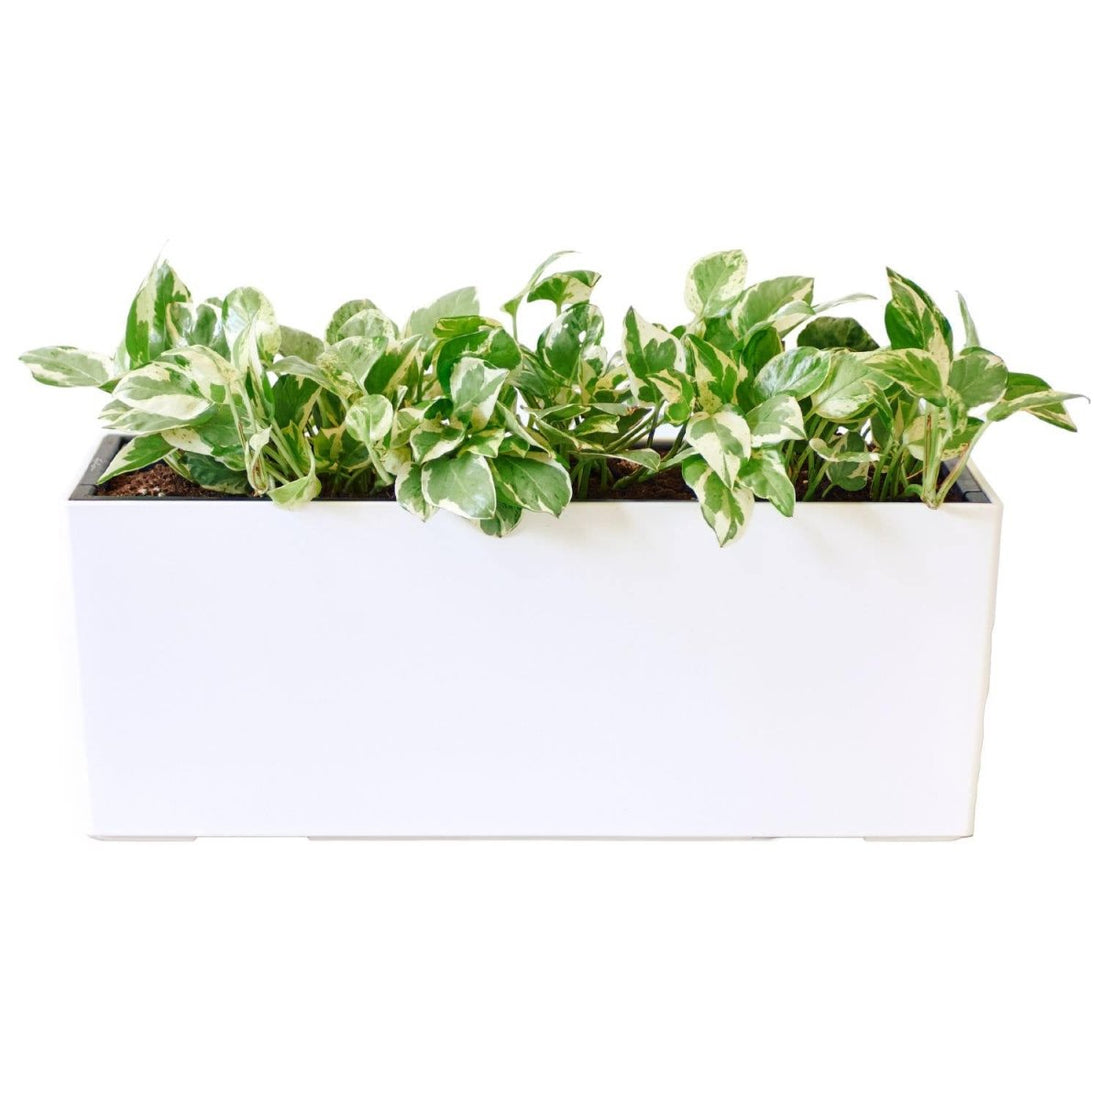 Pothos Pearls And Jade Potted In Lechuza Balconera Planter - White - My City Plants